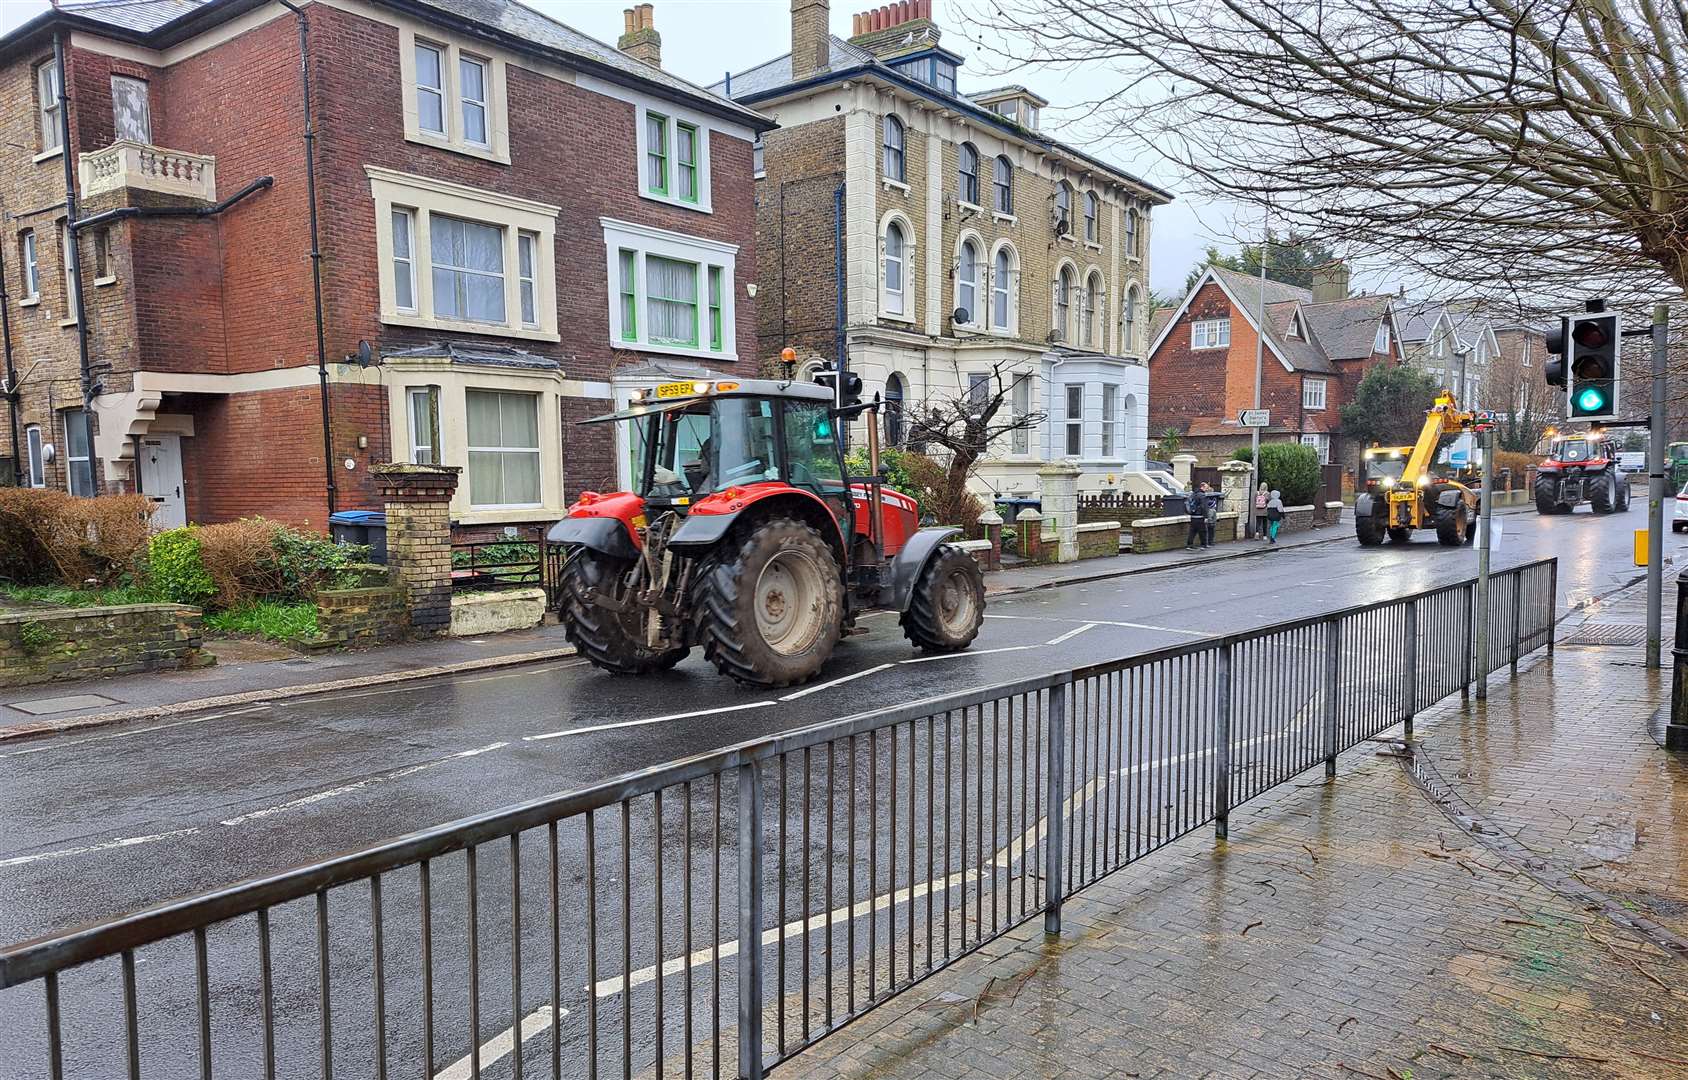 Farmers made their way down Maison Dieu Road during protests through Dover